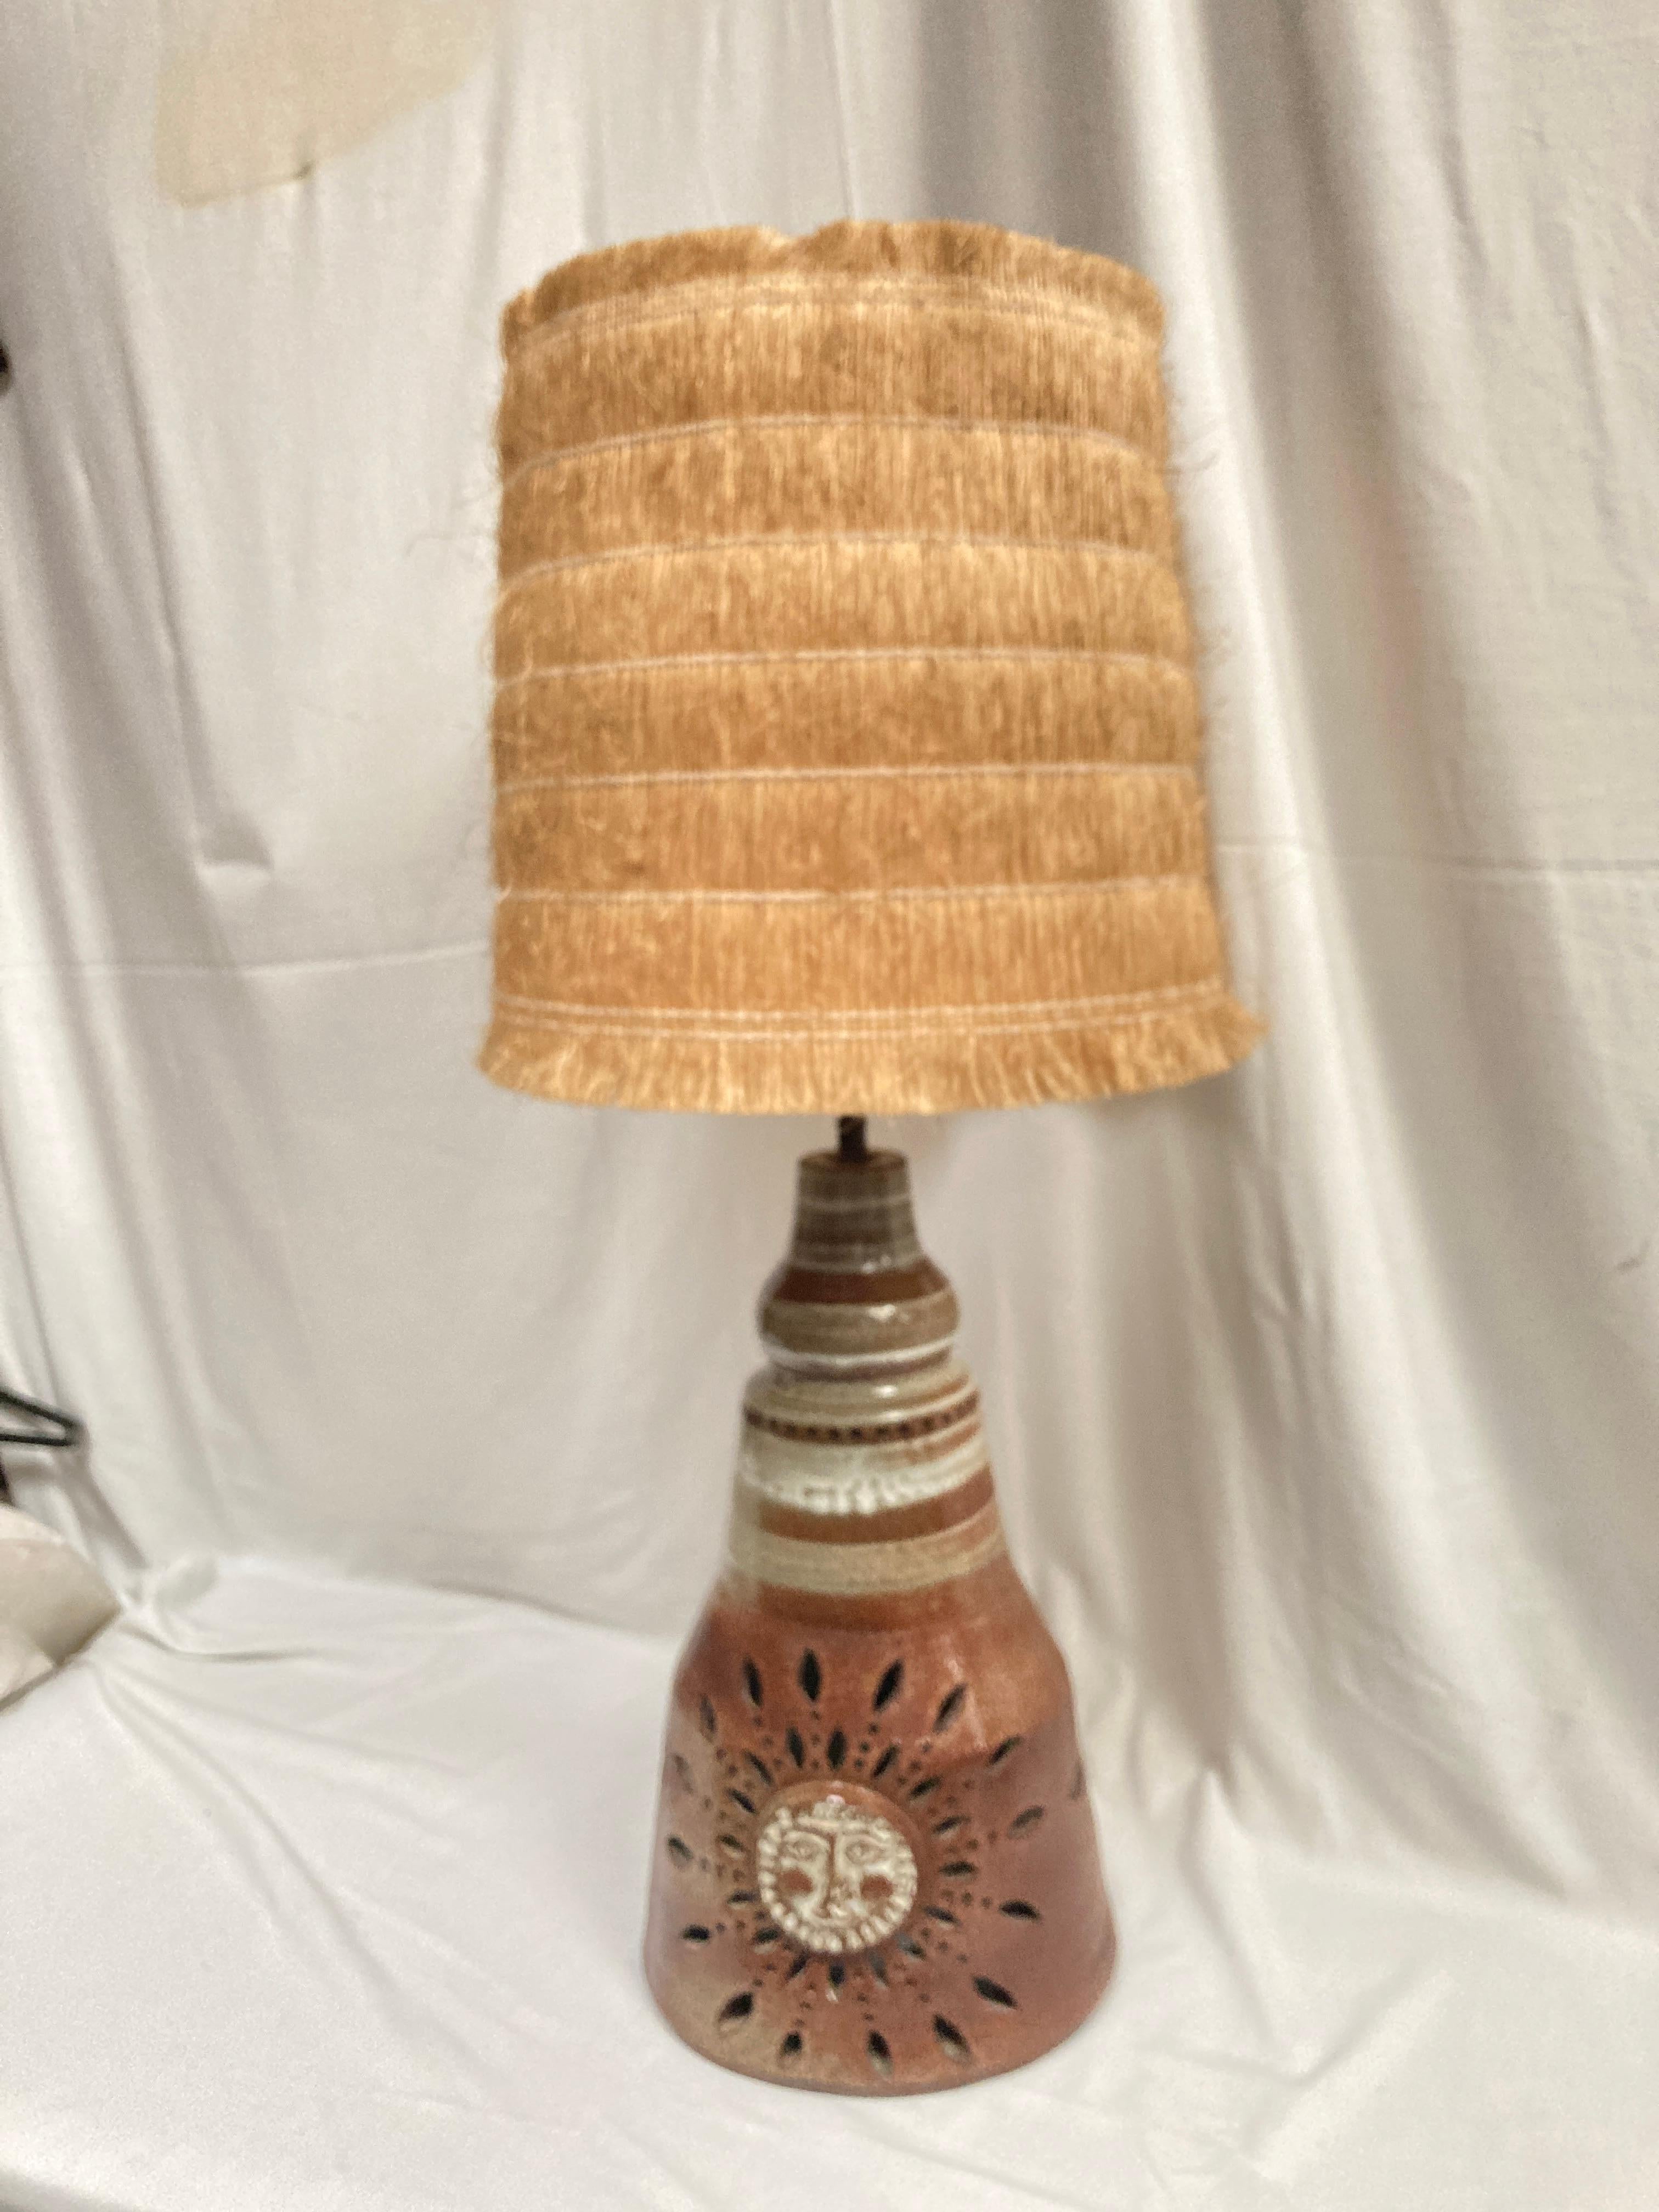 Very nice studio pottery ceramic lamp 
Two lights inside and outside
Sunburst decoration
No shade included
Dimensions given without shade